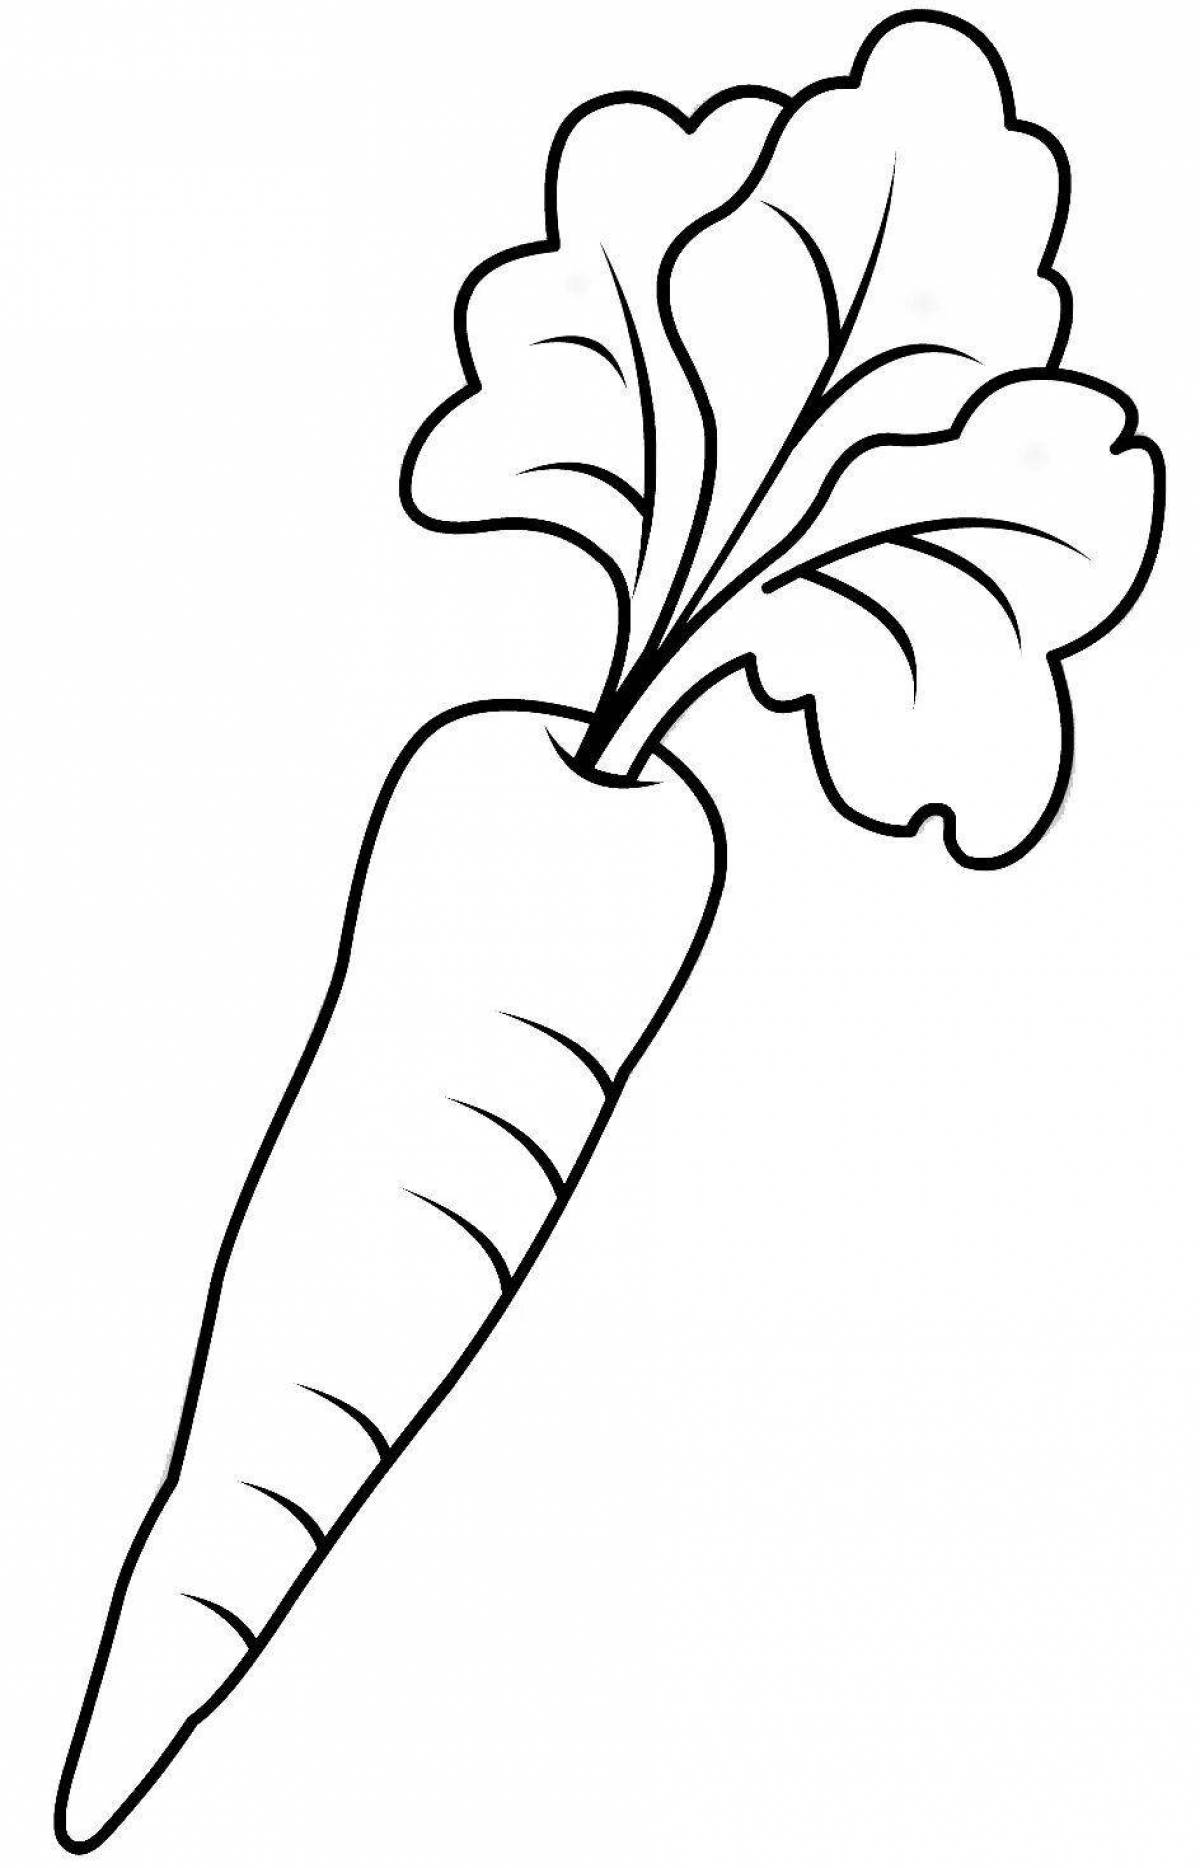 Carrot drawing for kids #9